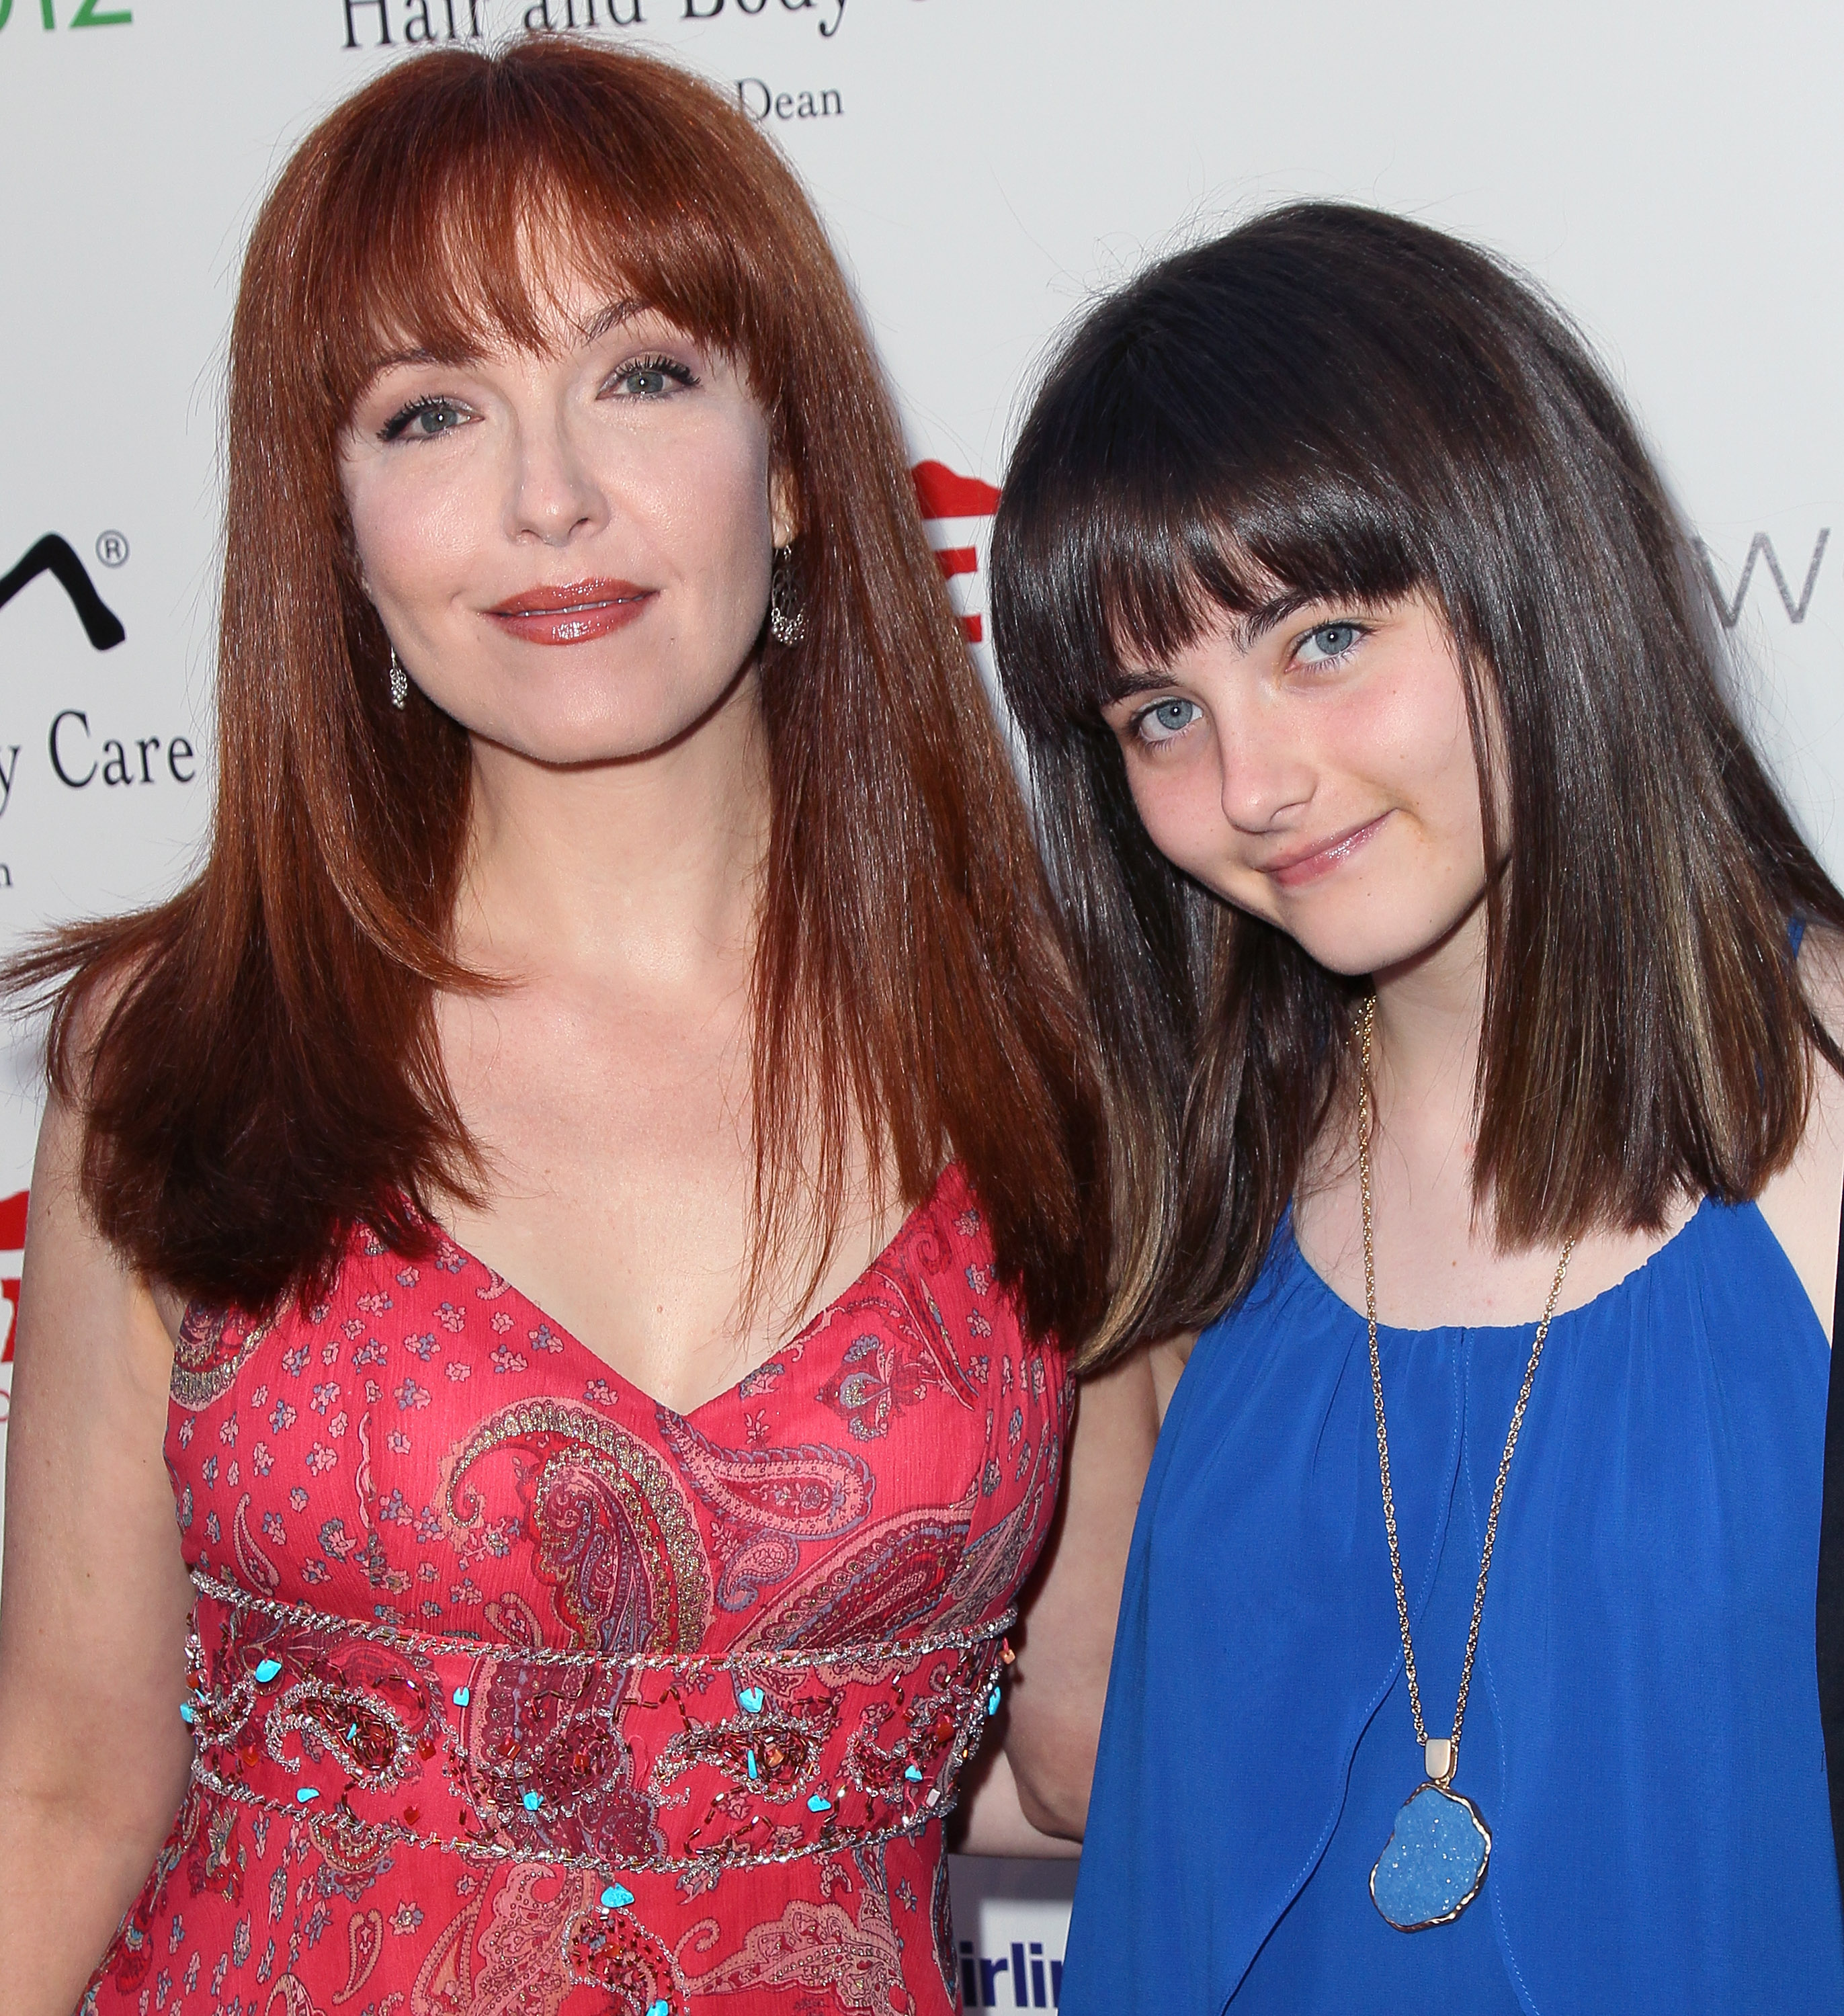 Amy Yasbeck and Stella Ritter at the 14th Annual DesignCare event in Malibu, California on July 21, 2012 | Source: Getty Images